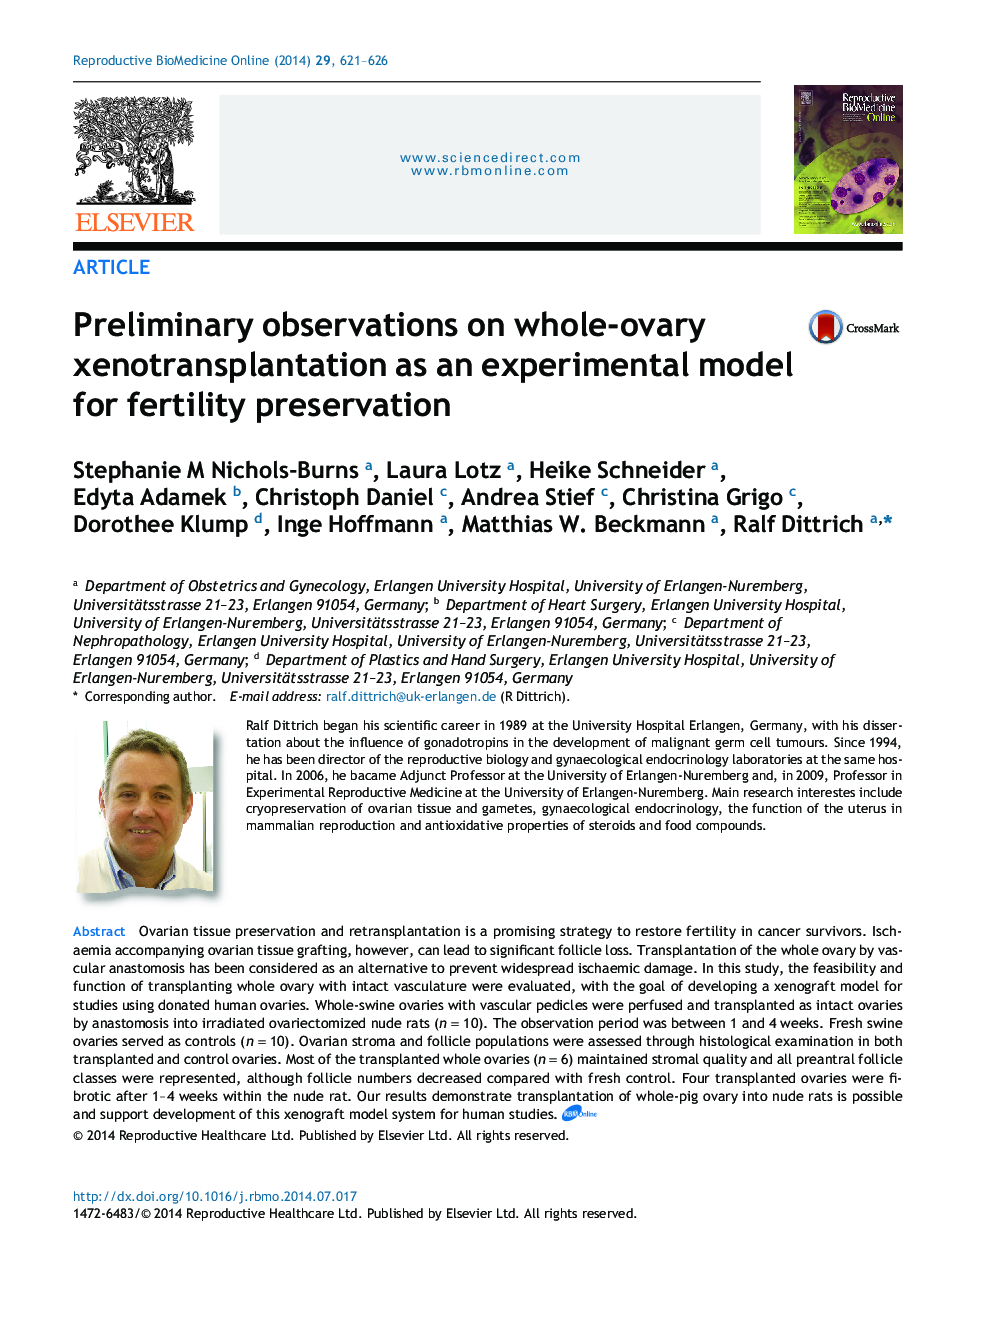 Preliminary observations on whole-ovary xenotransplantation as an experimental model for fertility preservation